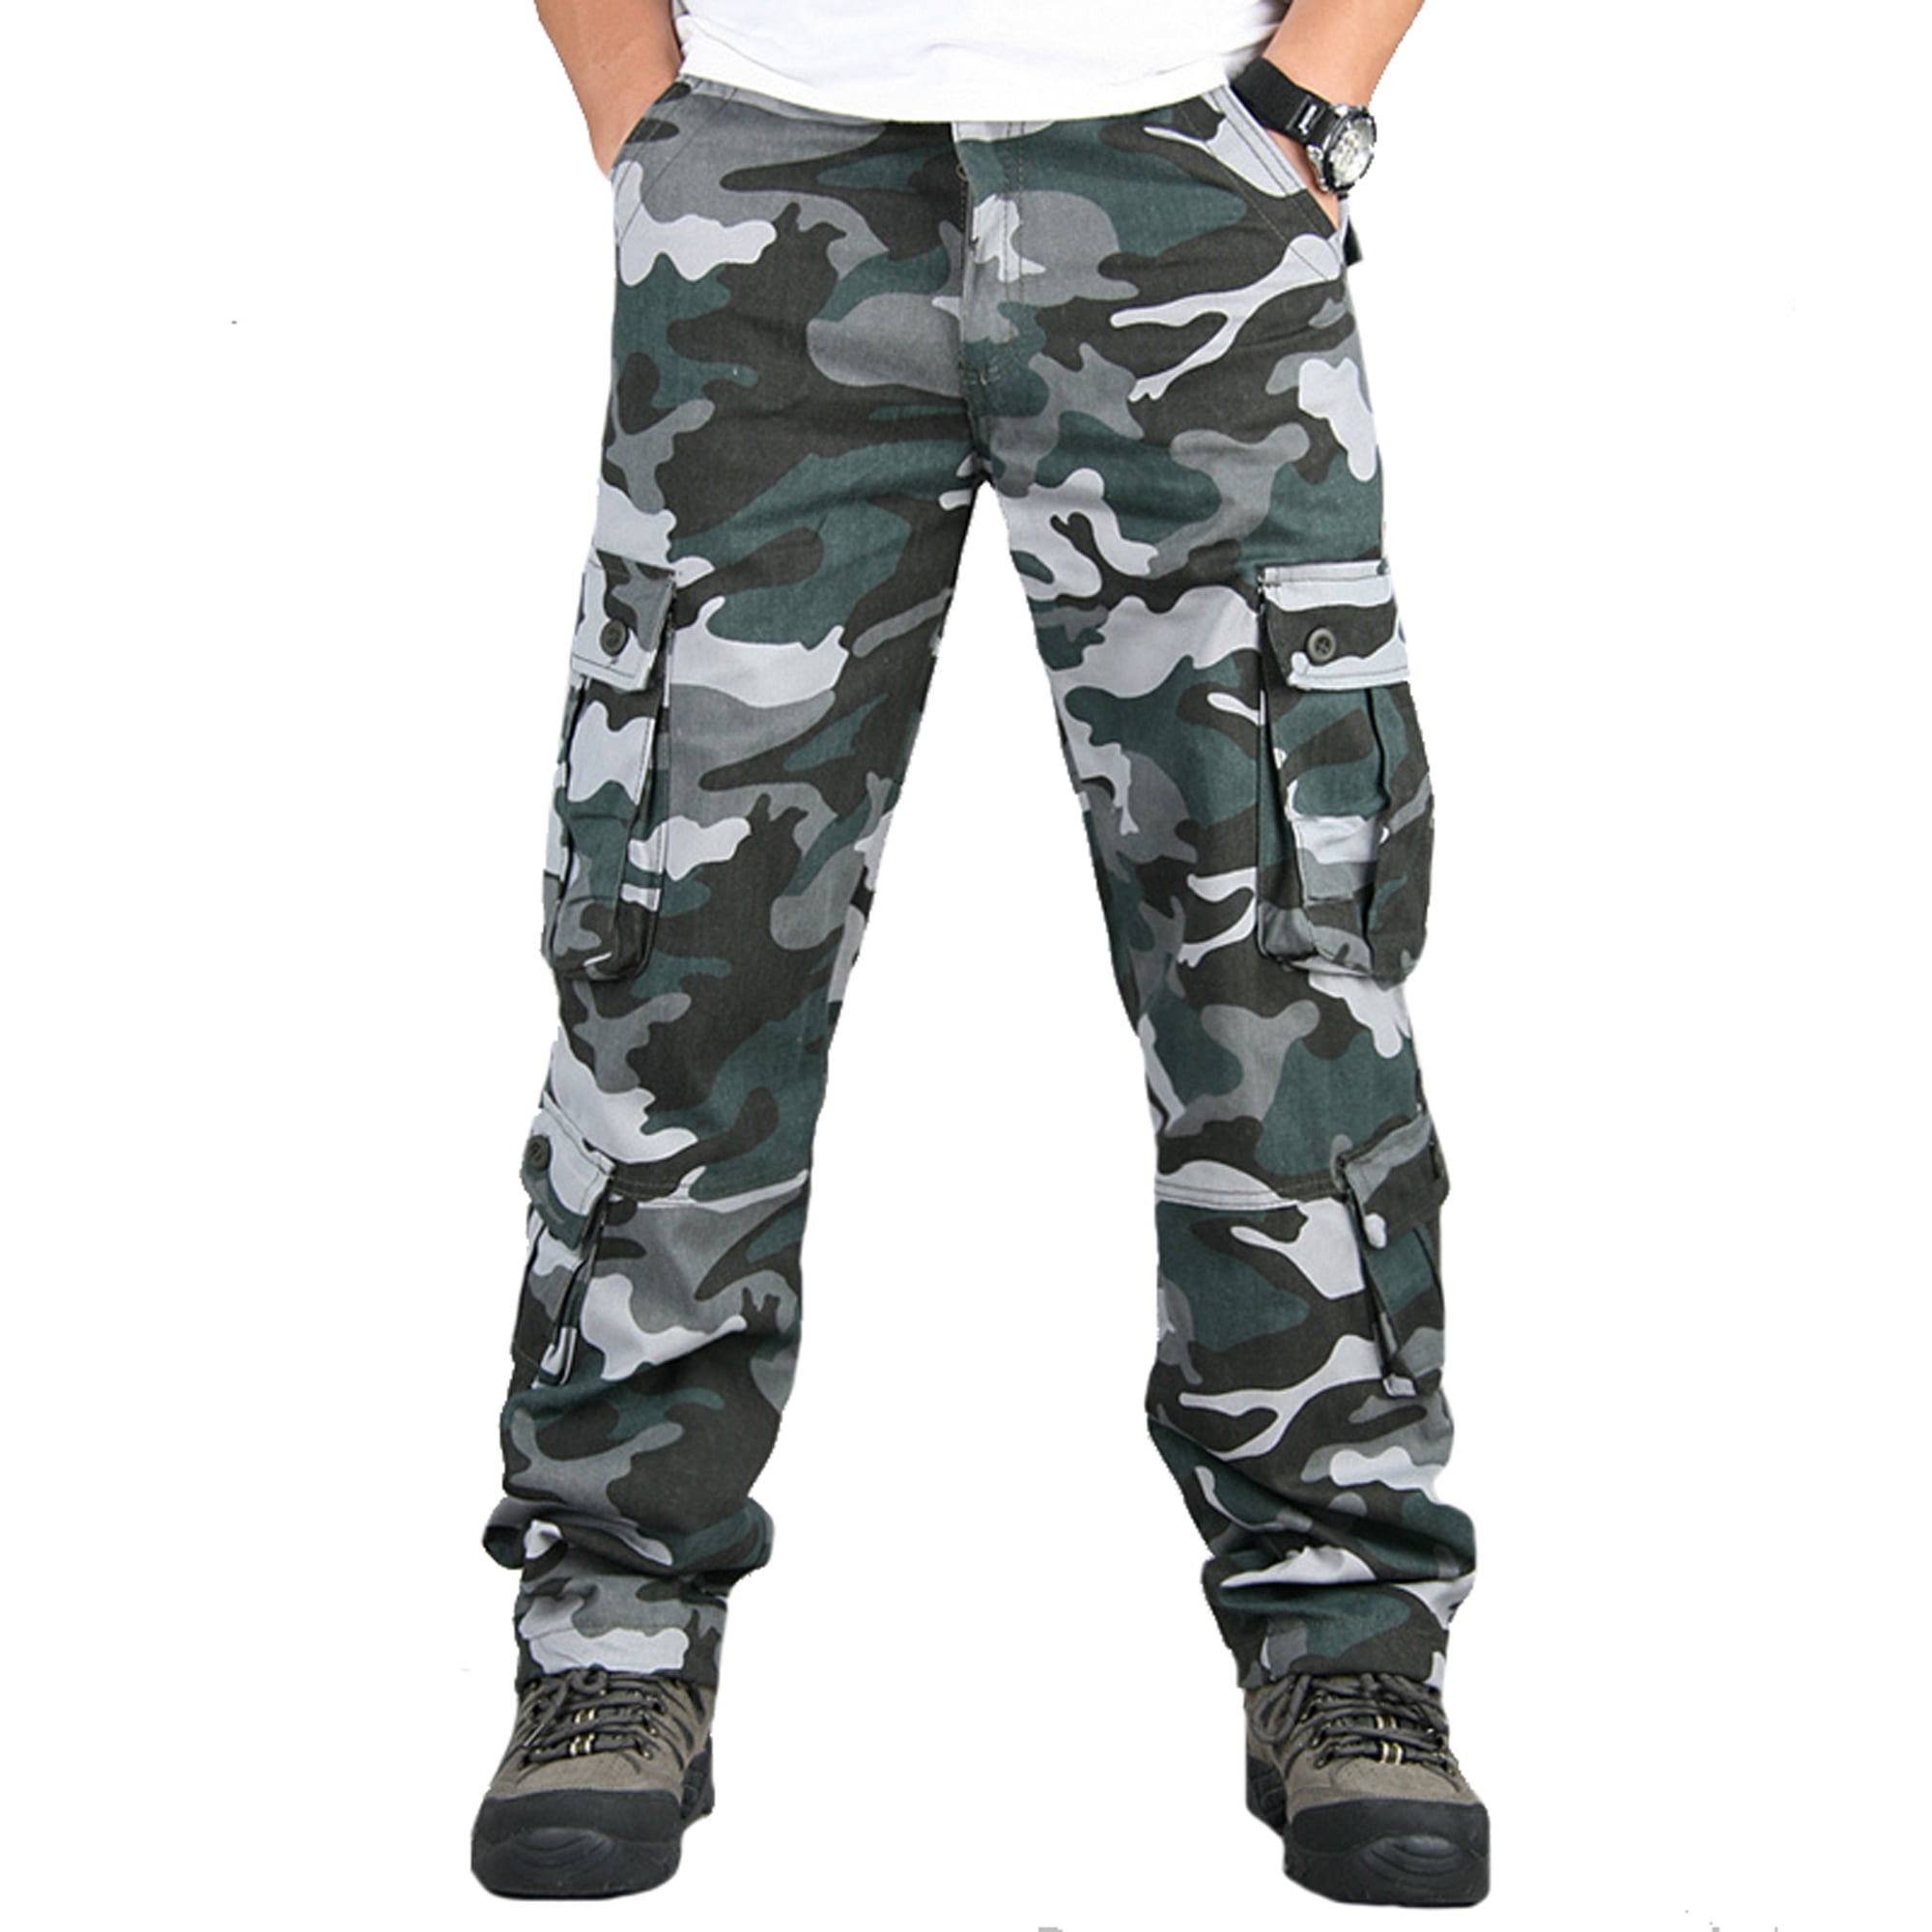 Mens Military Combat Trousers Camouflage Printed Cargo Army Casual Work Long Pants Walmart Canada